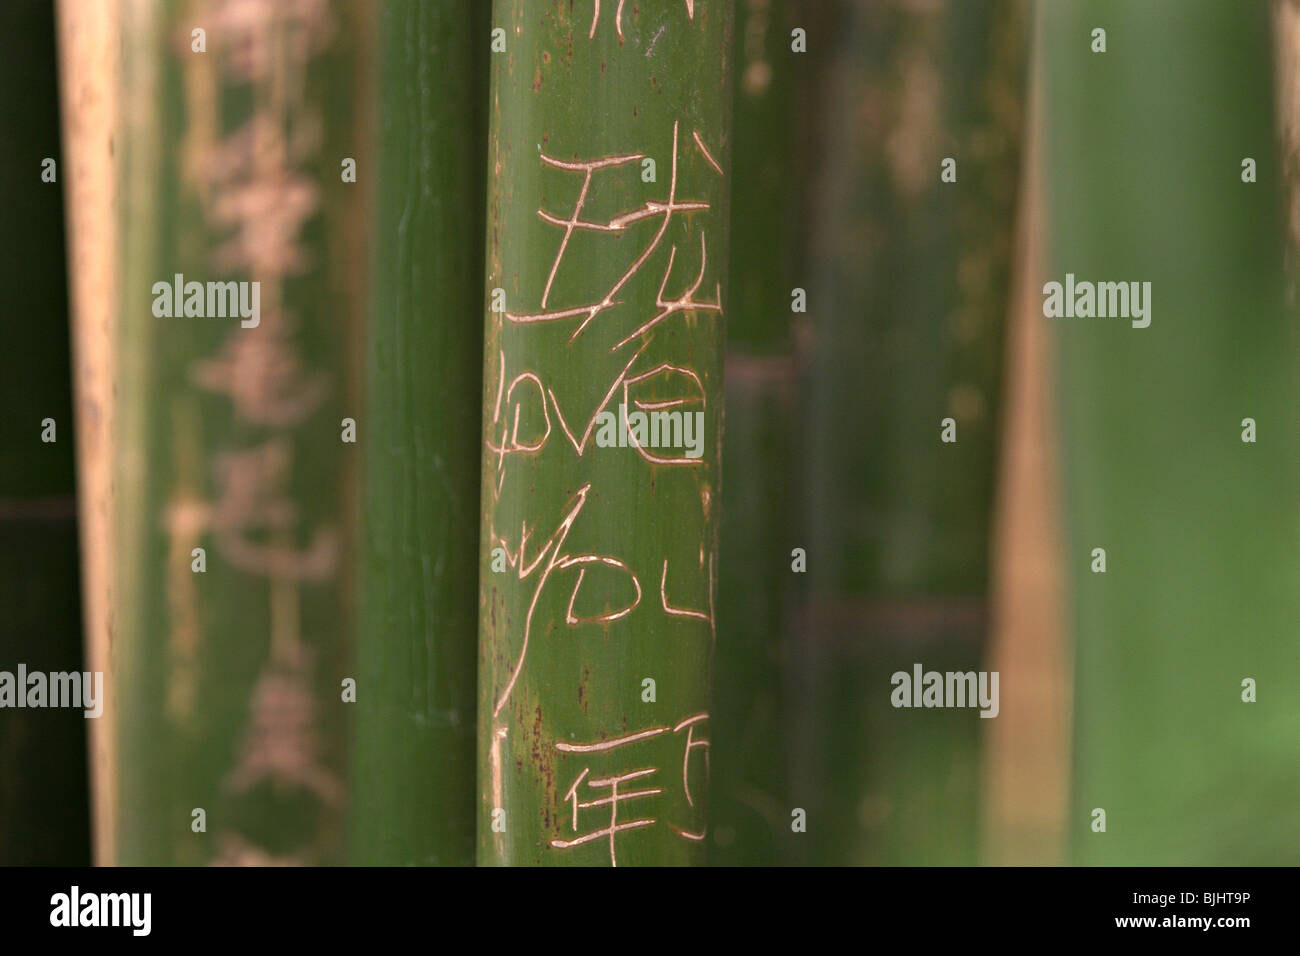 Graffiti reading 'I Love You' etched into bamboo, in the gounds of Yunnan University, Kunming, China. Stock Photo